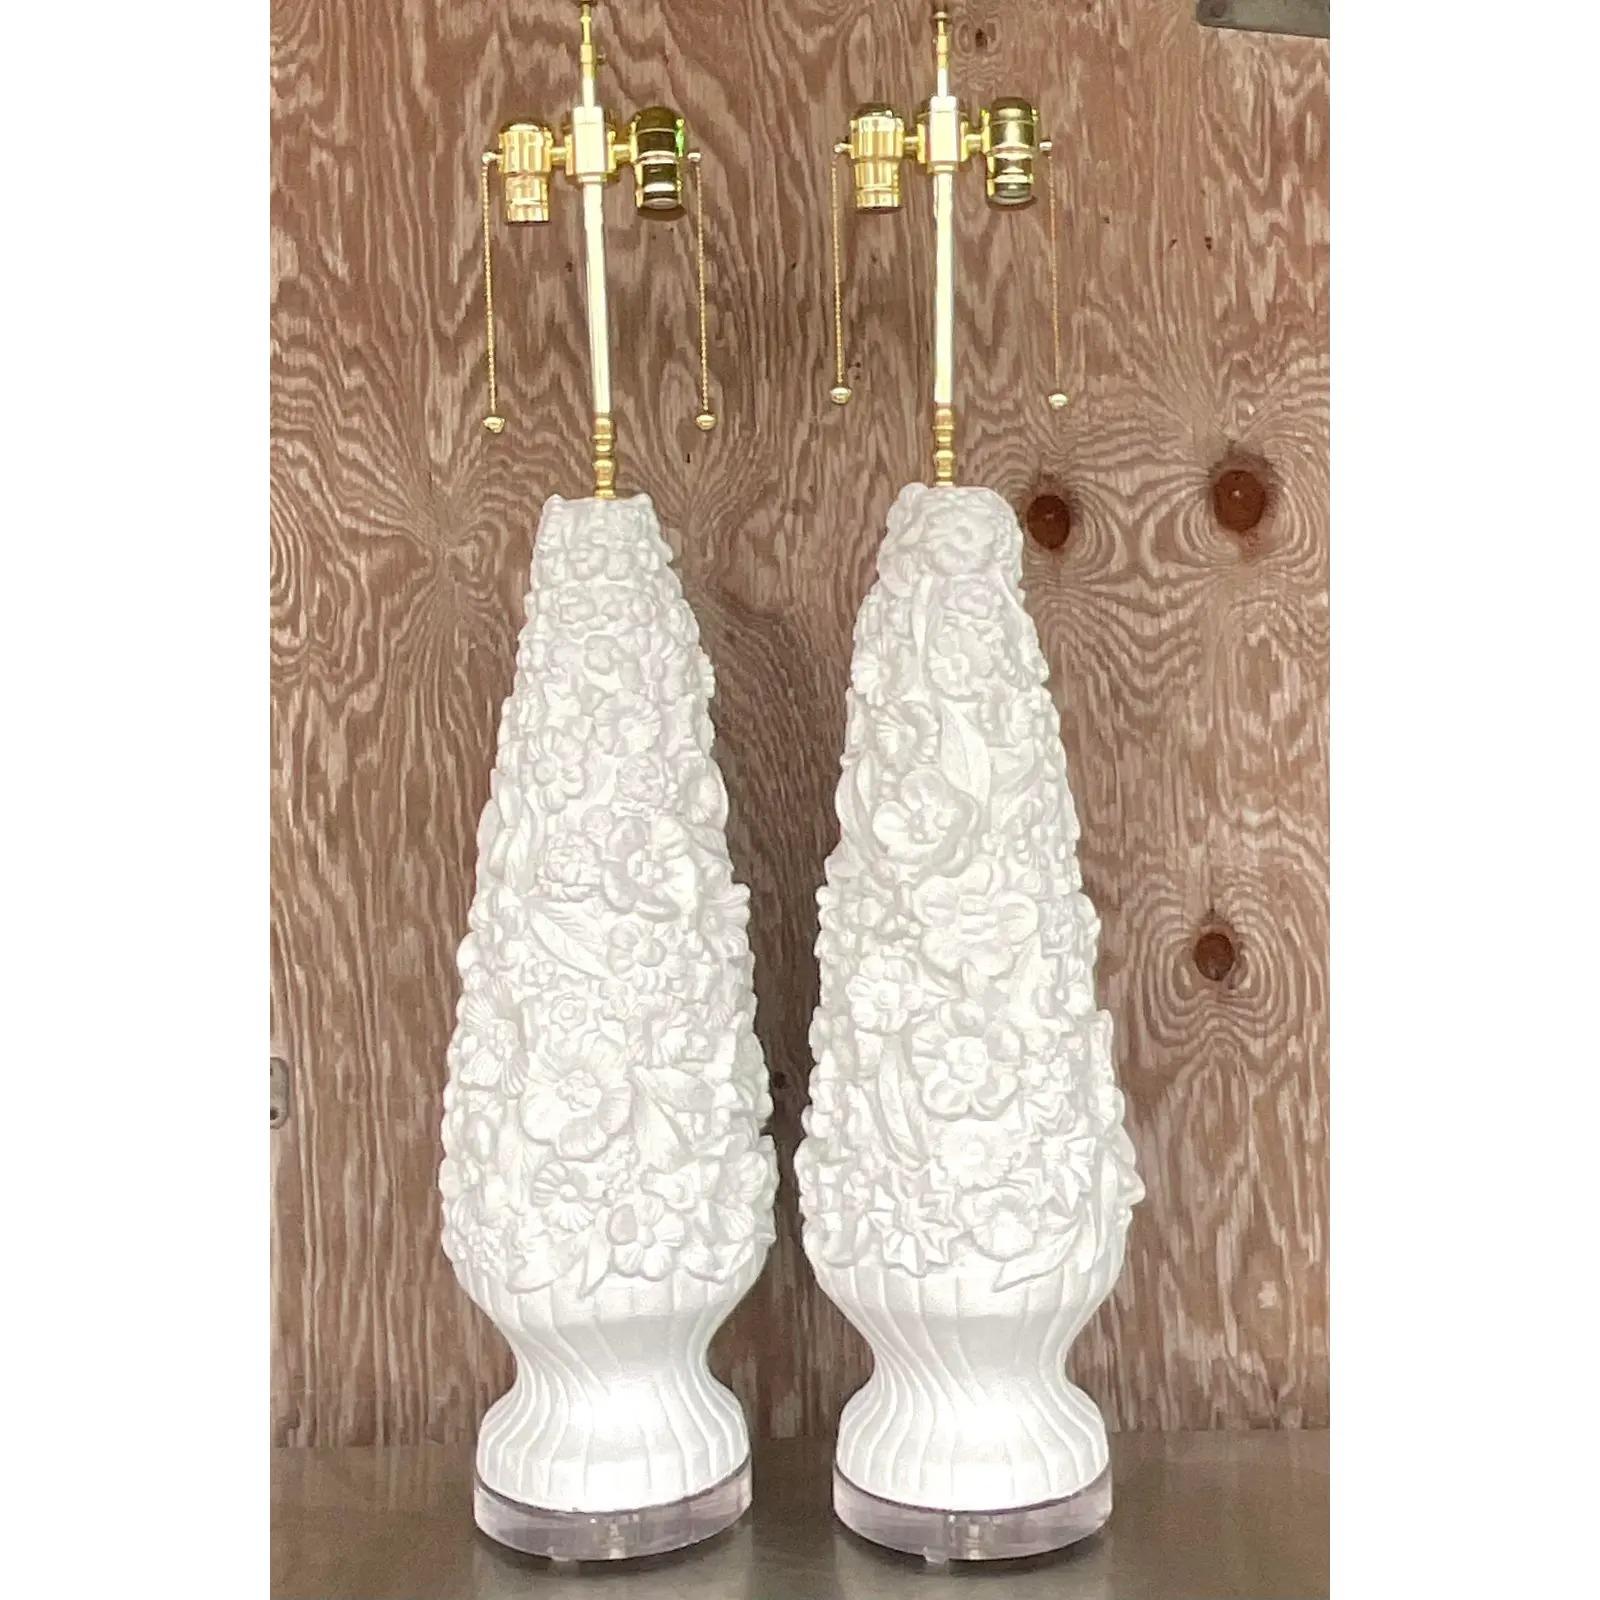 North American Vintage Coastal Monumental Plaster Floral Table Lamps - a Pair For Sale